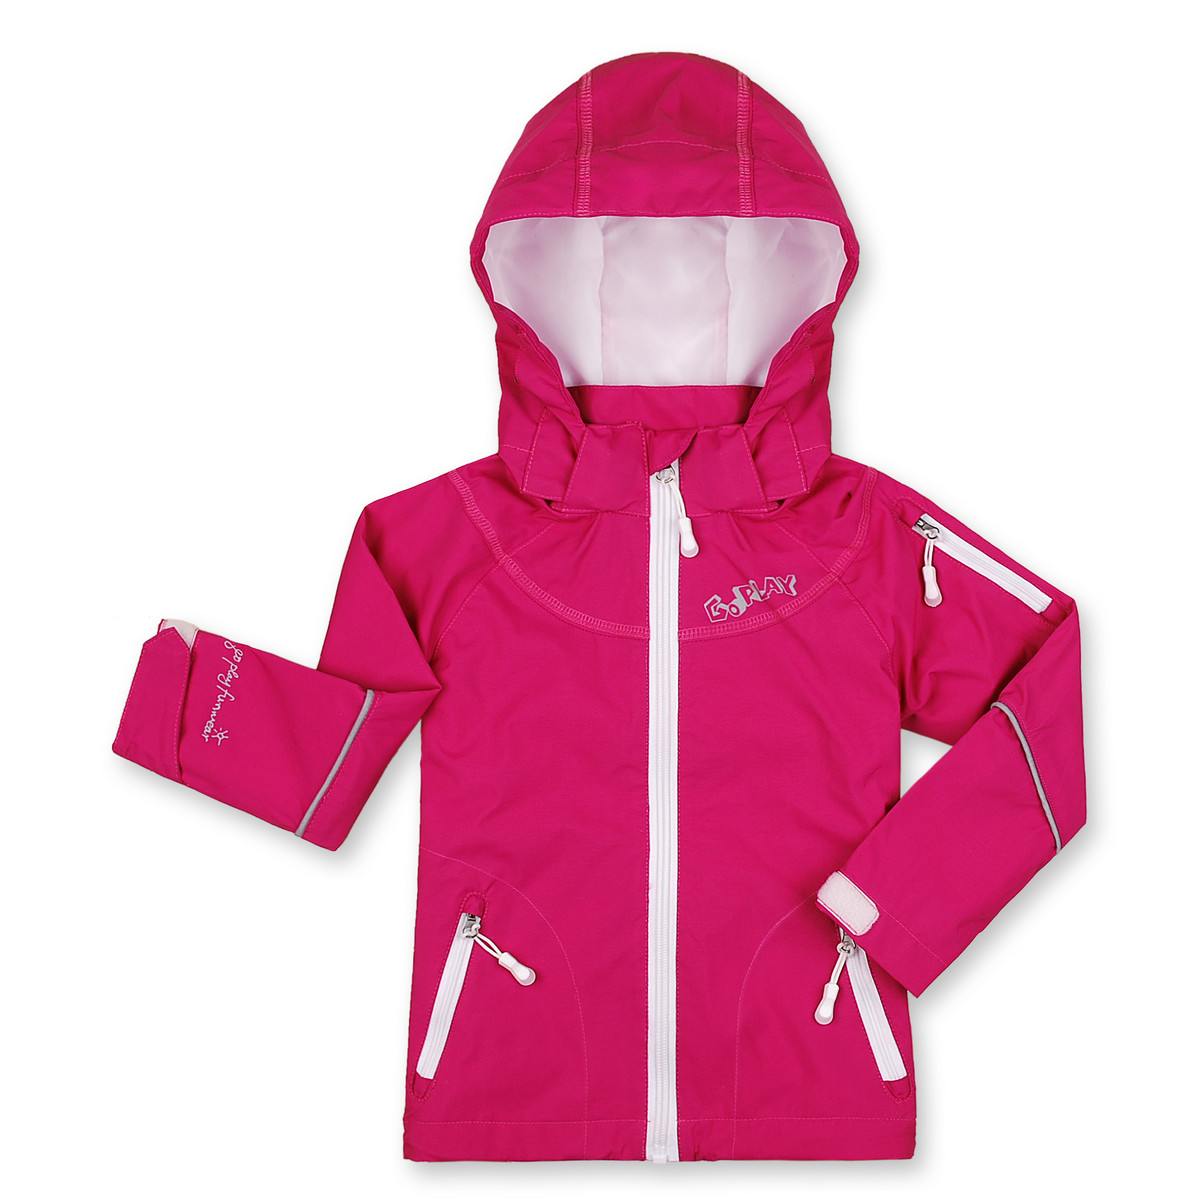 Goplay2013 children's spring and autumn clothing female child windproof waterproof outerwear hooded trench